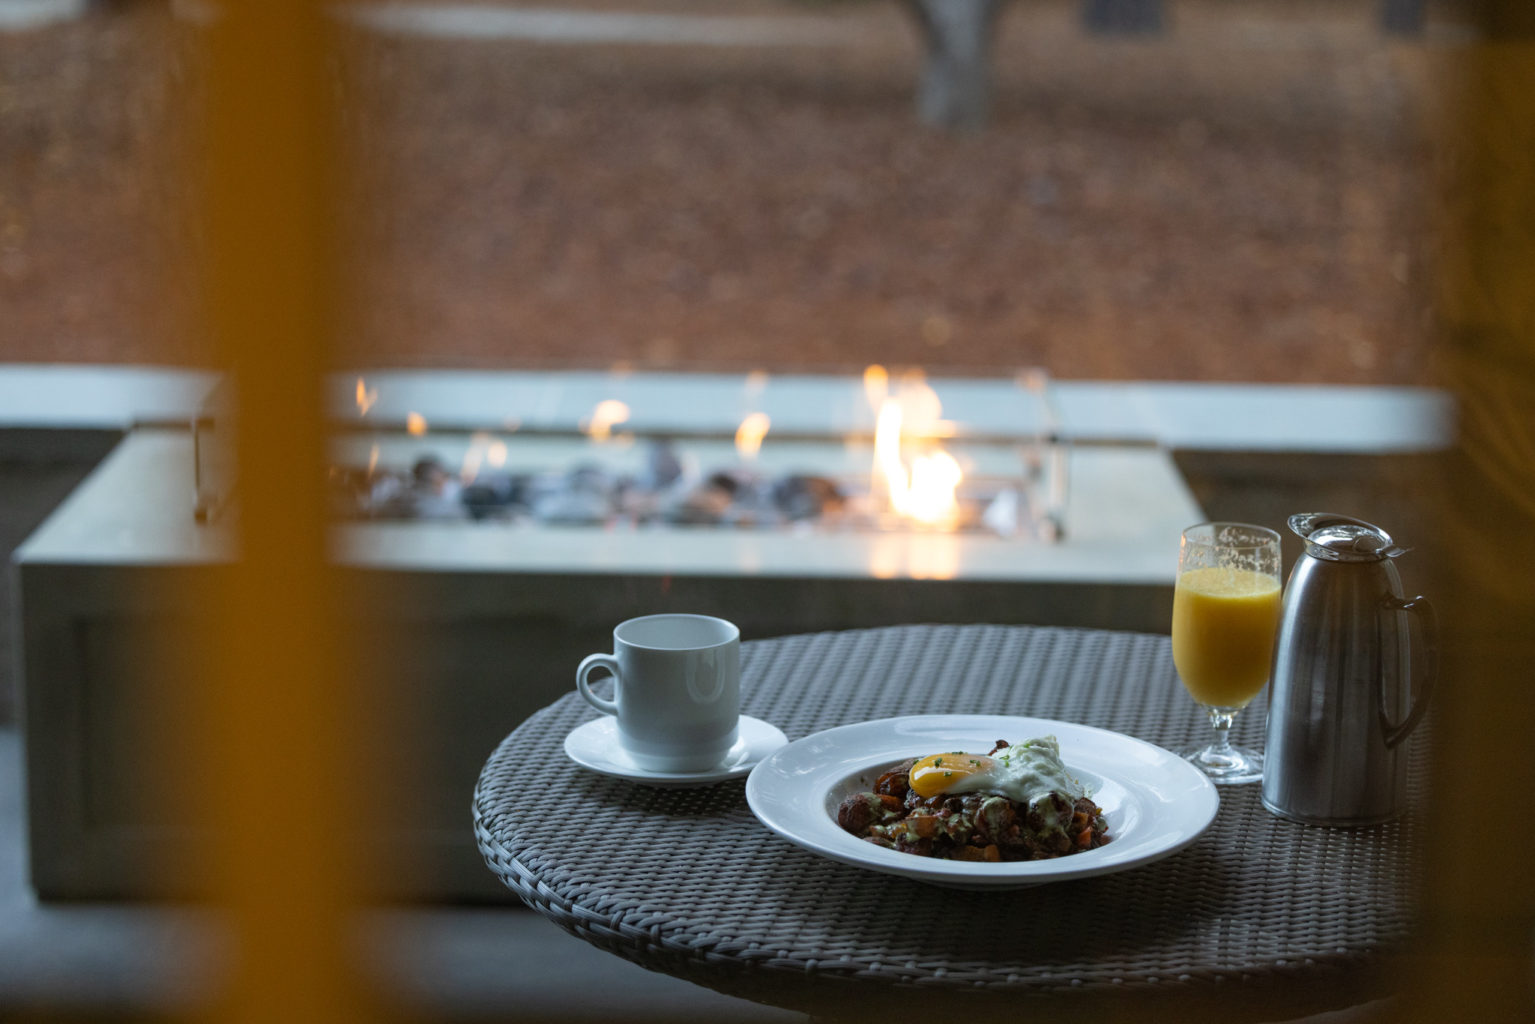 A fireside room and breakfast at the Ritz Carlton.